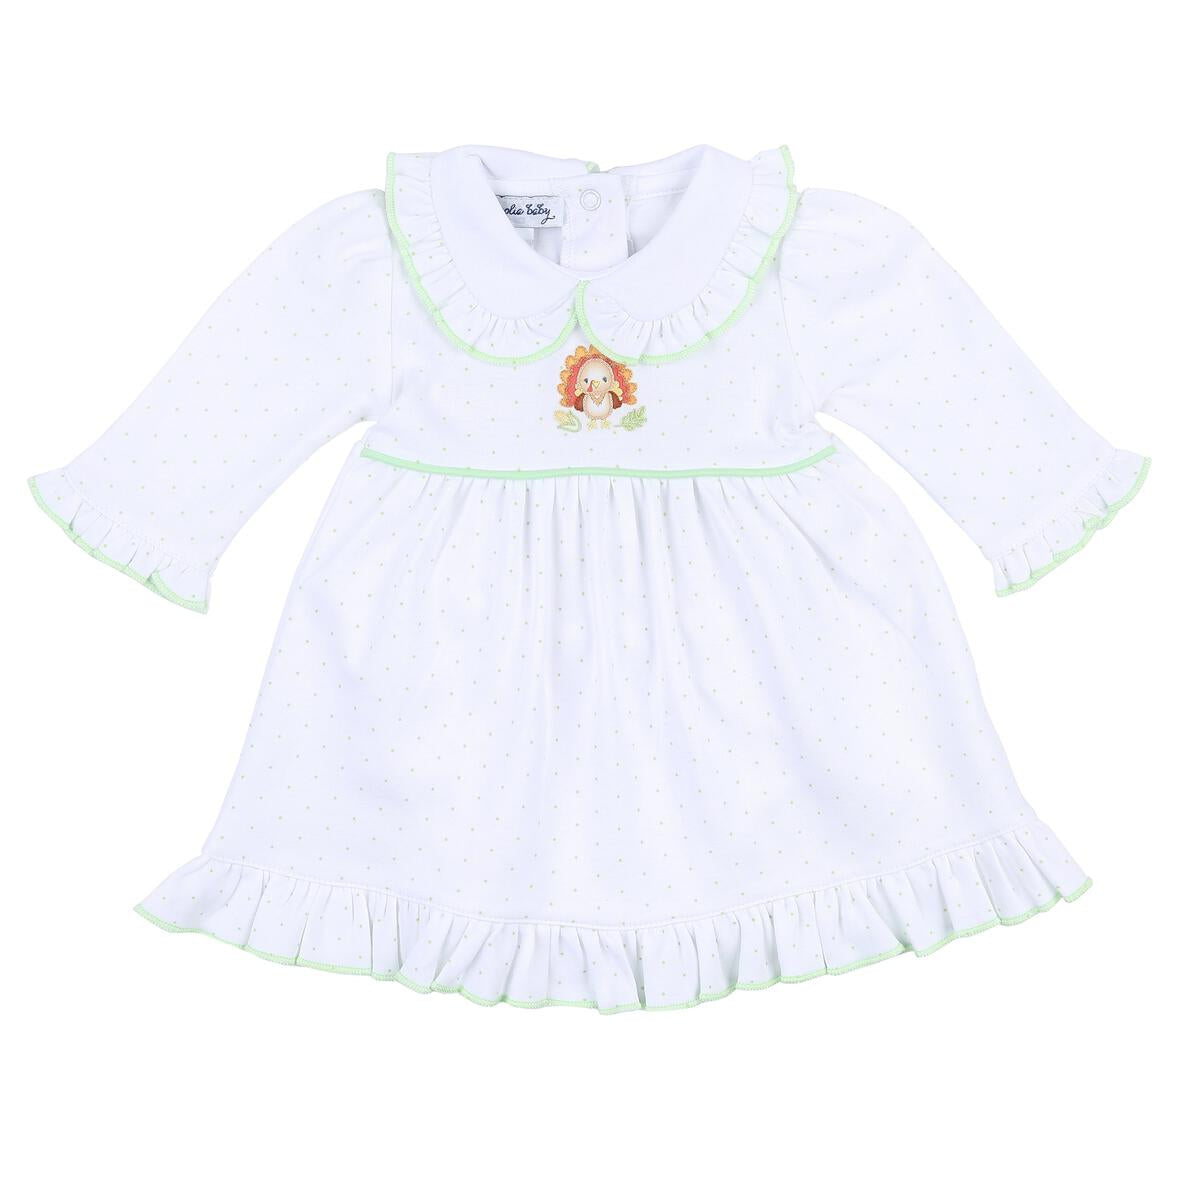 Magnolia Baby Giving Thanks Embroidered Collared Dress